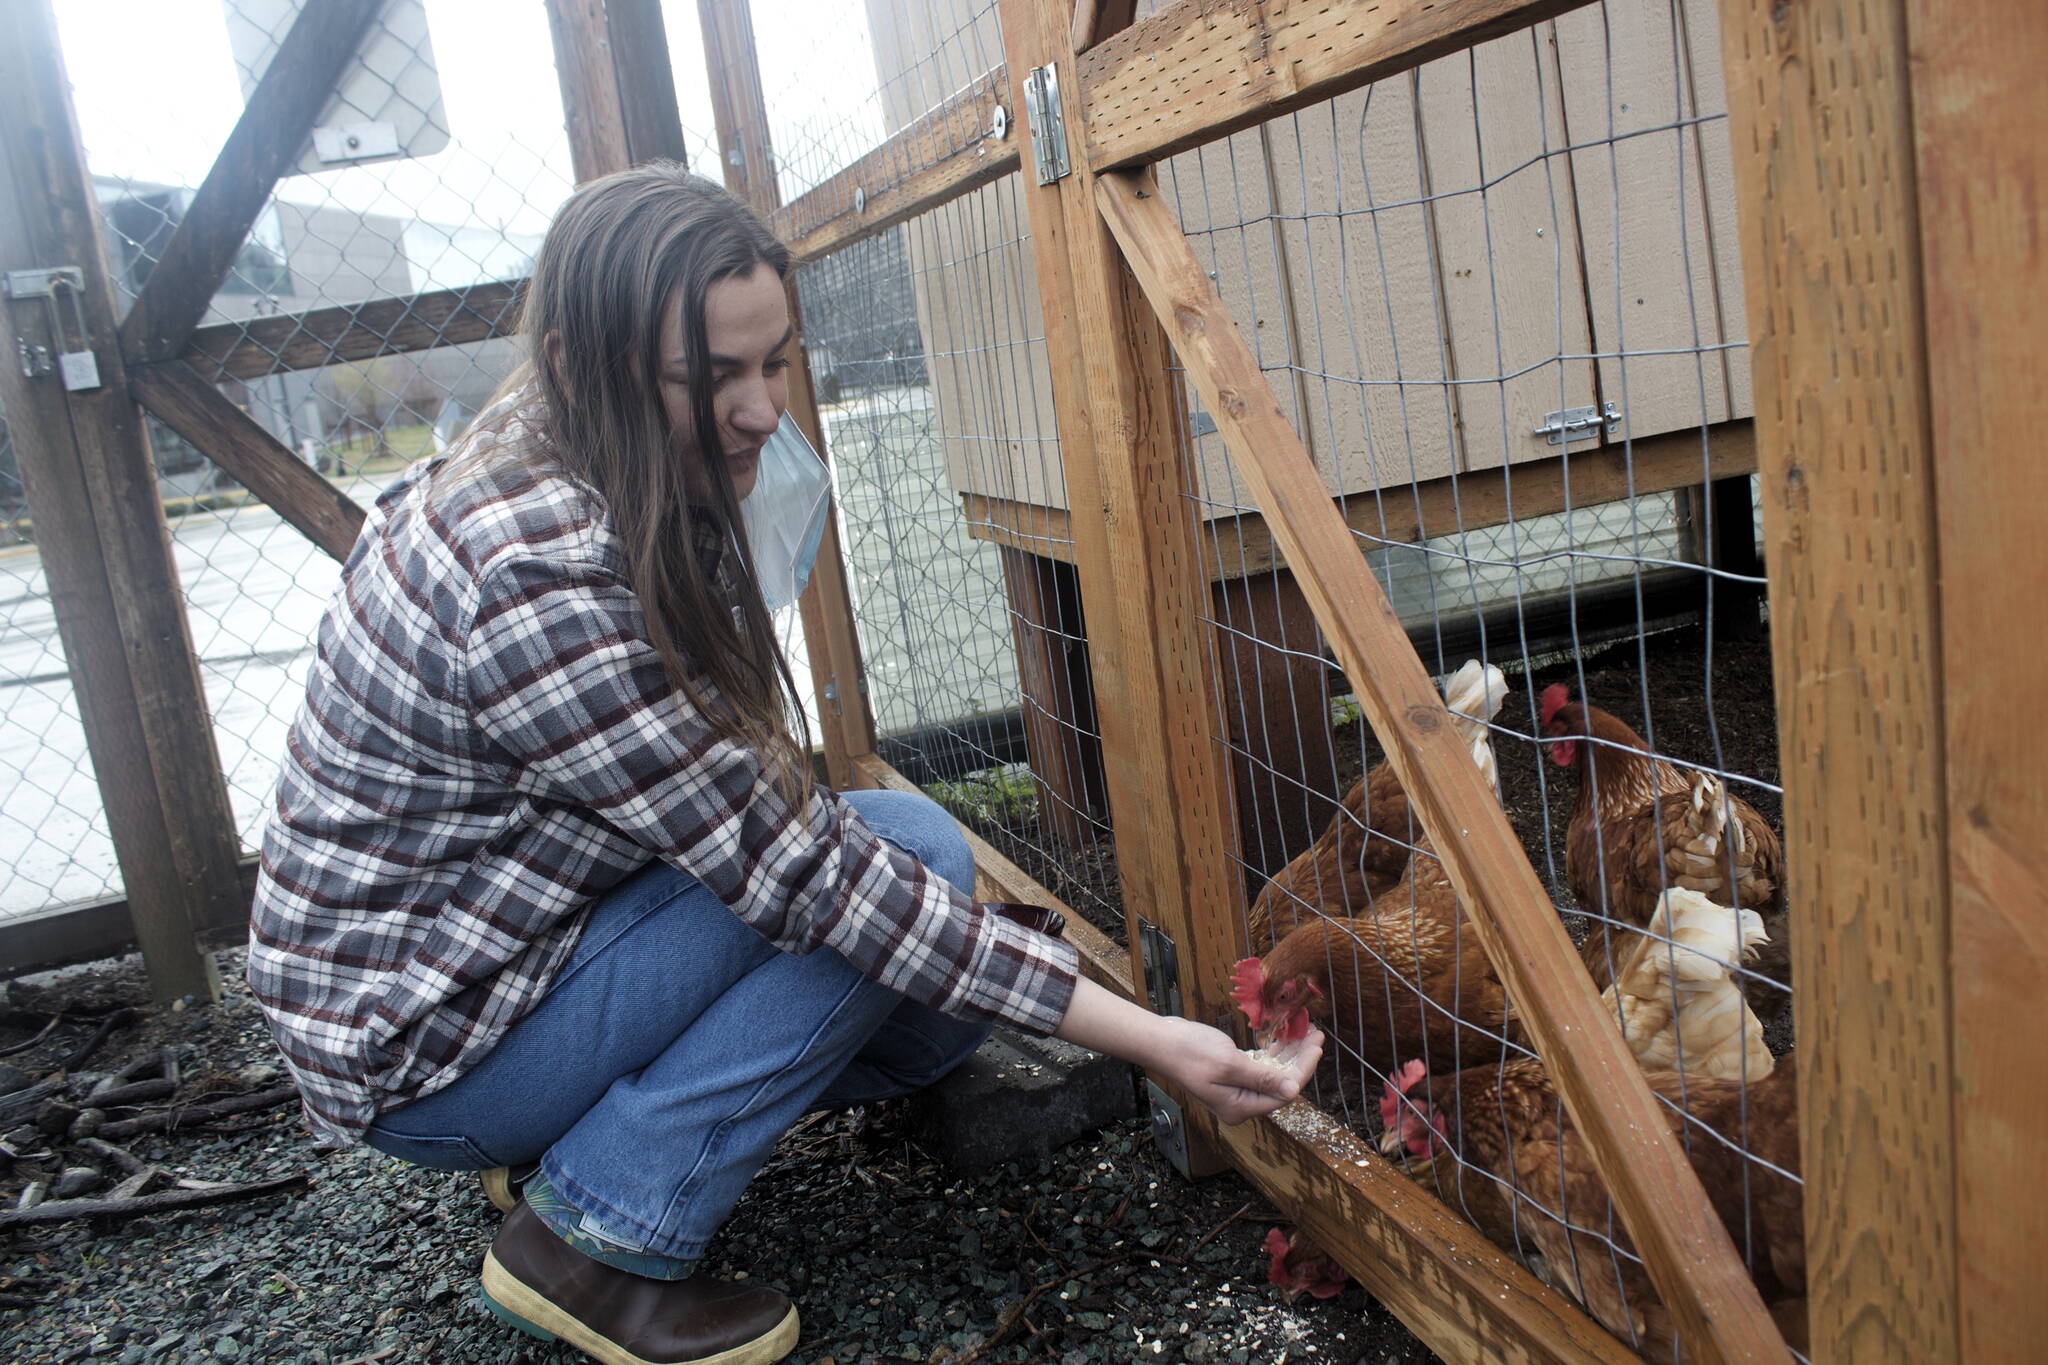 Anne Bonino-Britsch, a volunteer, feeds chickens at the Zach Gordon Youth Center. The first case of bird flu tied to a recent outbreak that’s killed millions of turkeys and chickens was confirmed in Alaska last week, but local poultry owners said while they’re being cautious, they aren’t overly concerned. (Mark Sabbatini / Juneau Empire)